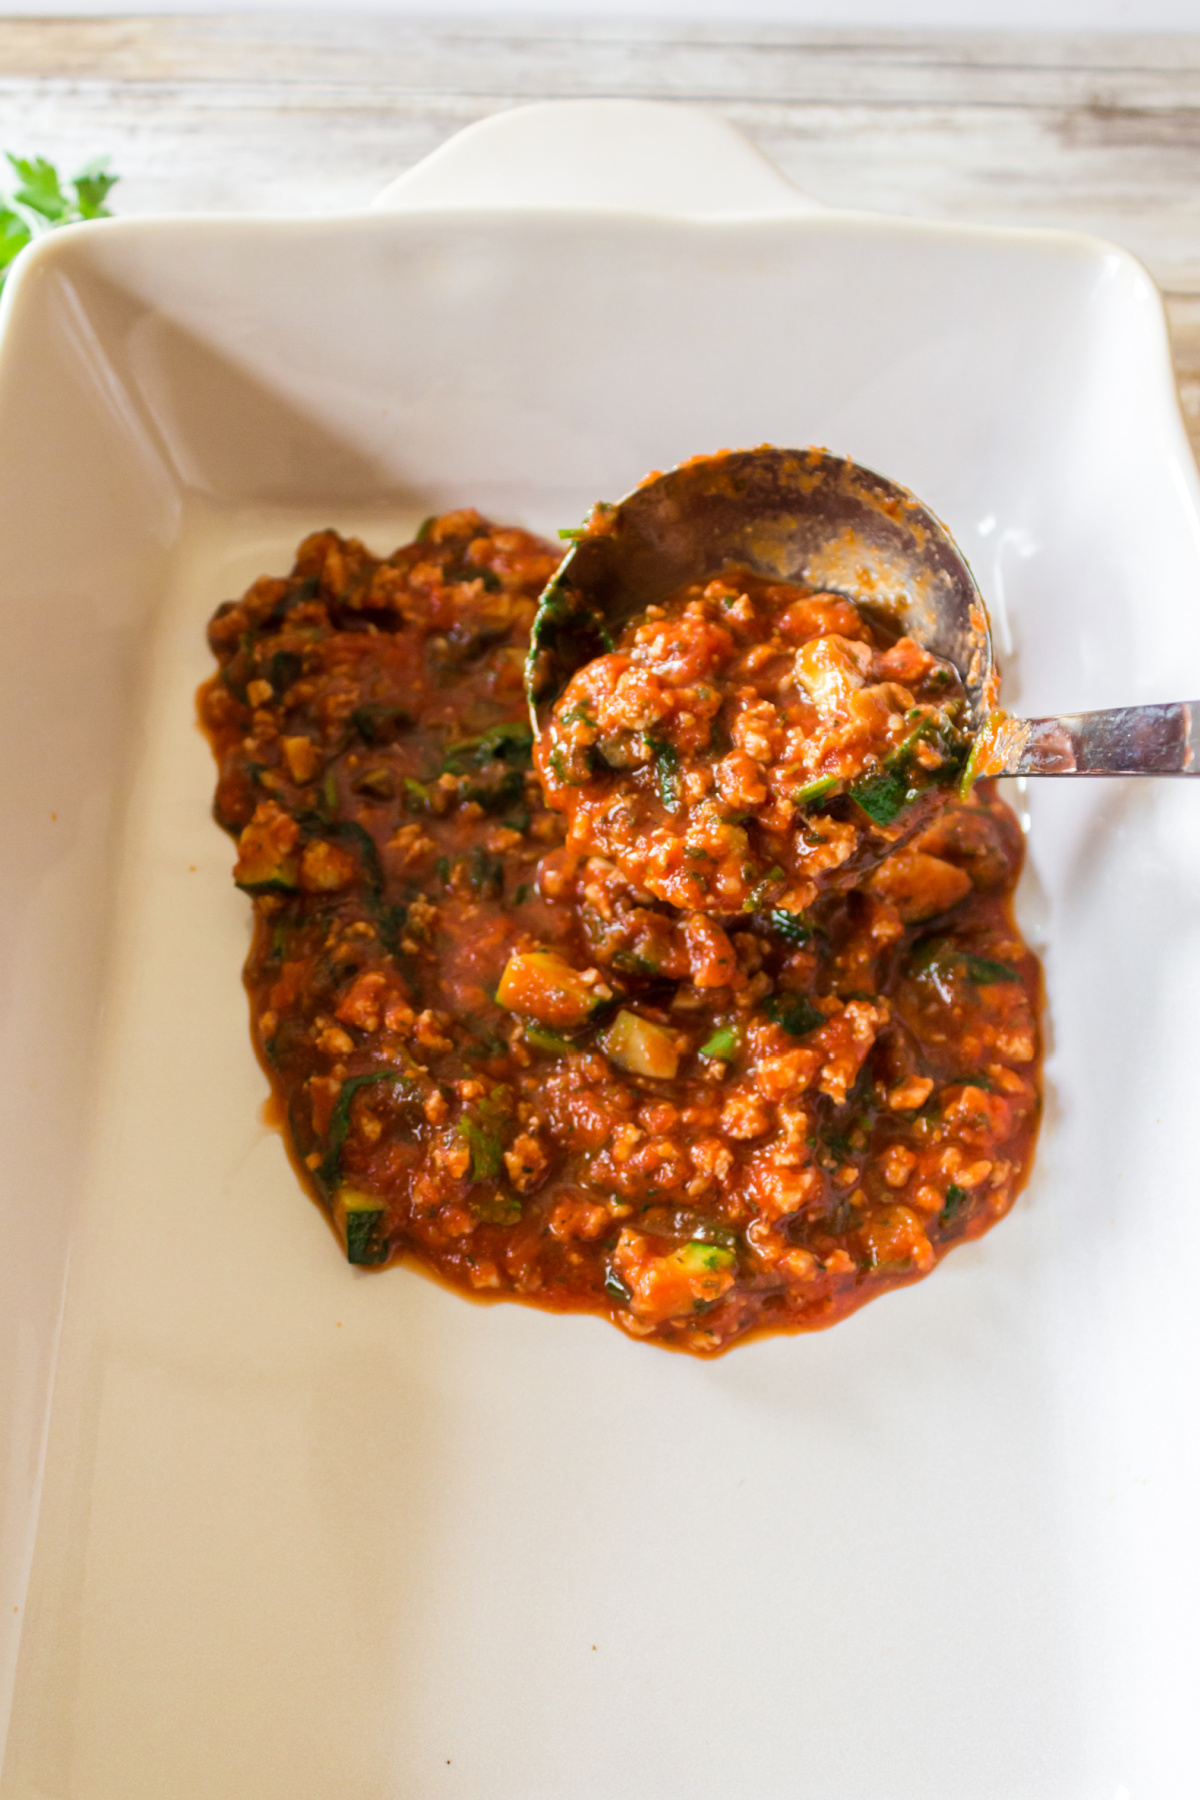 A ladle serving a portion of chunky tomato-based vegetable stew into a white baking dish